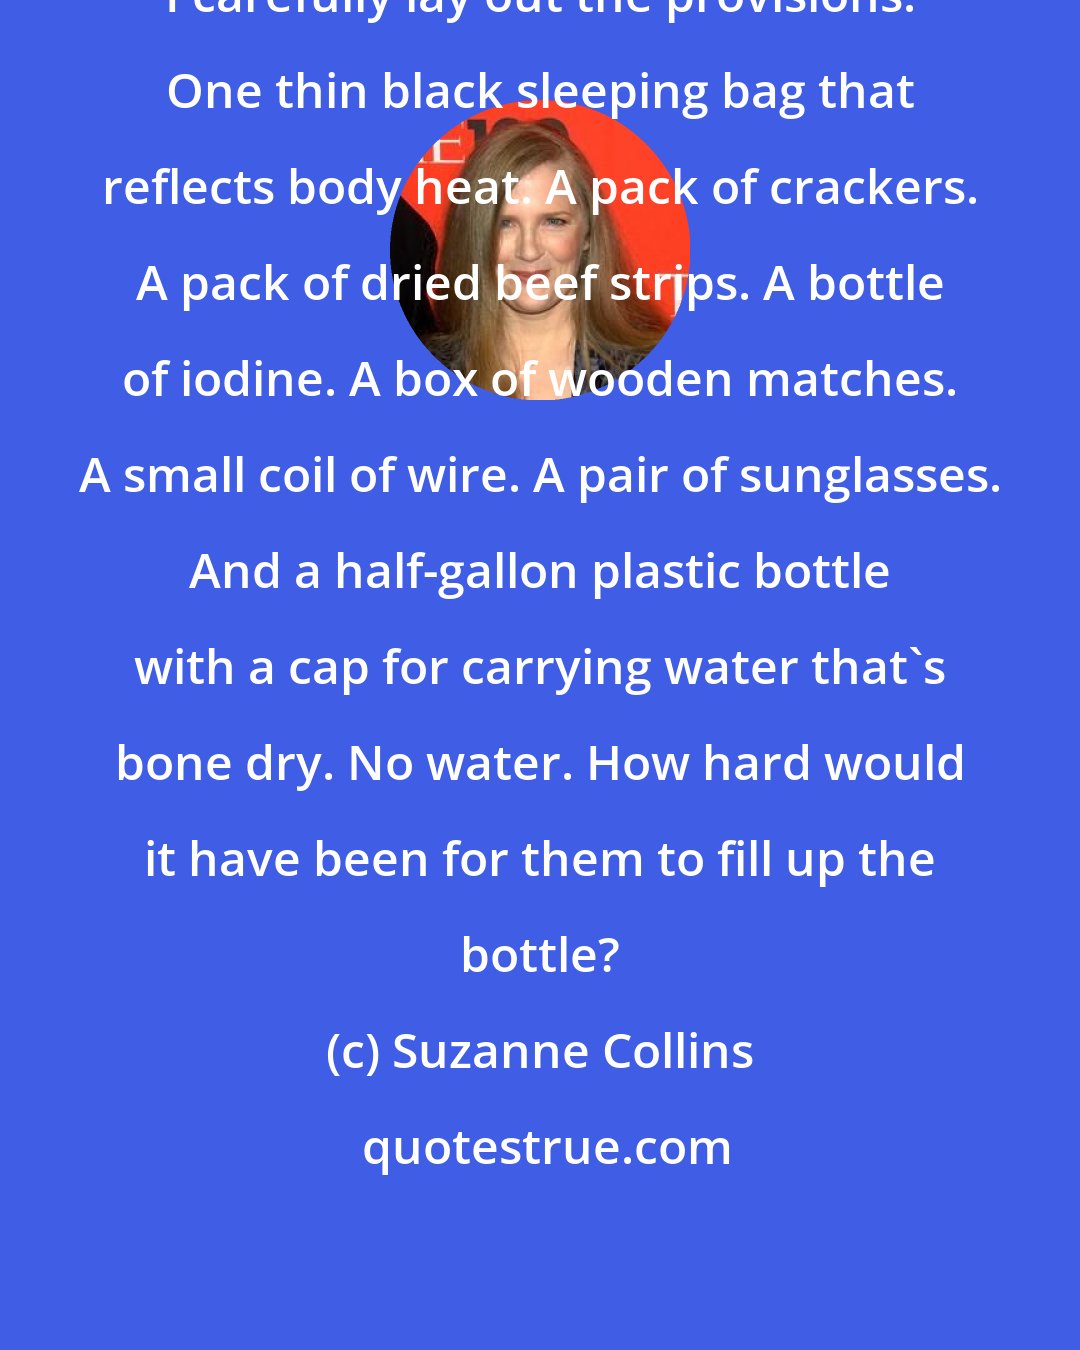 Suzanne Collins: I carefully lay out the provisions. One thin black sleeping bag that reflects body heat. A pack of crackers. A pack of dried beef strips. A bottle of iodine. A box of wooden matches. A small coil of wire. A pair of sunglasses. And a half-gallon plastic bottle with a cap for carrying water that's bone dry. No water. How hard would it have been for them to fill up the bottle?